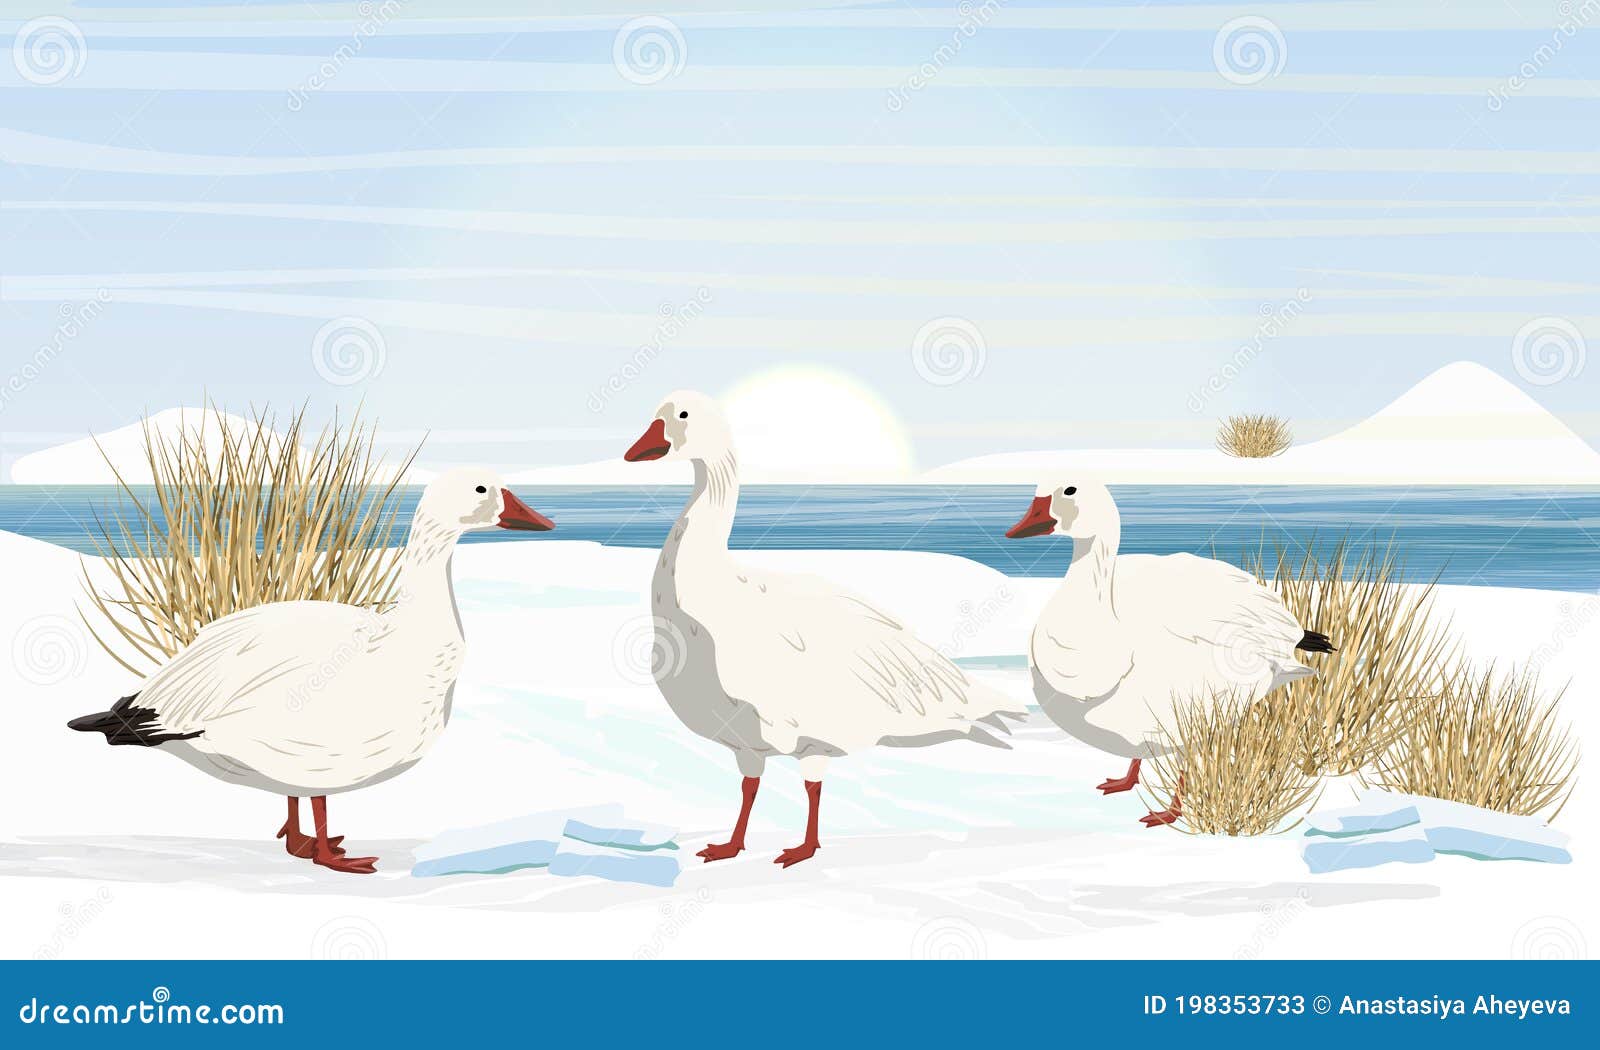 a flock of snow geese on the shores of the arctic ocean. birds of the arctic. white arctic goose anser caerulescens